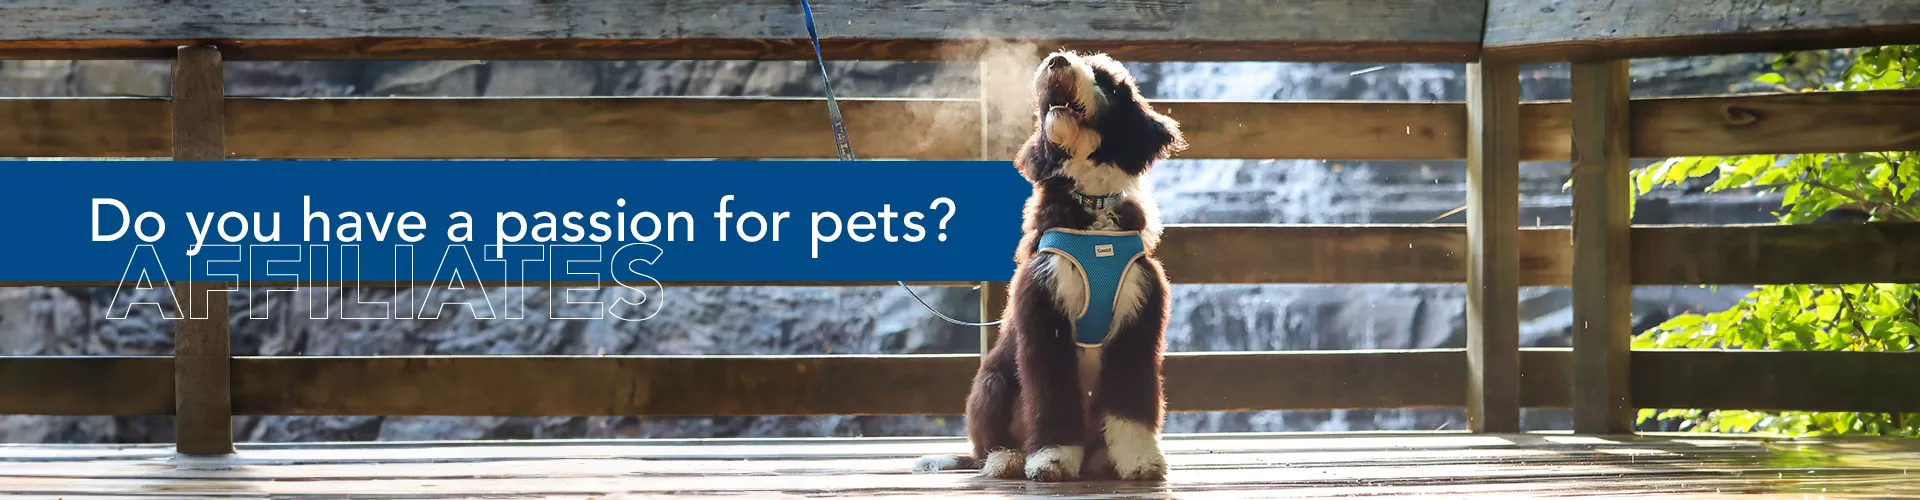 A dog on a wooden observation deck with a waterfall in the background with the text "Do you have a passion for pets?" on a blue banner.